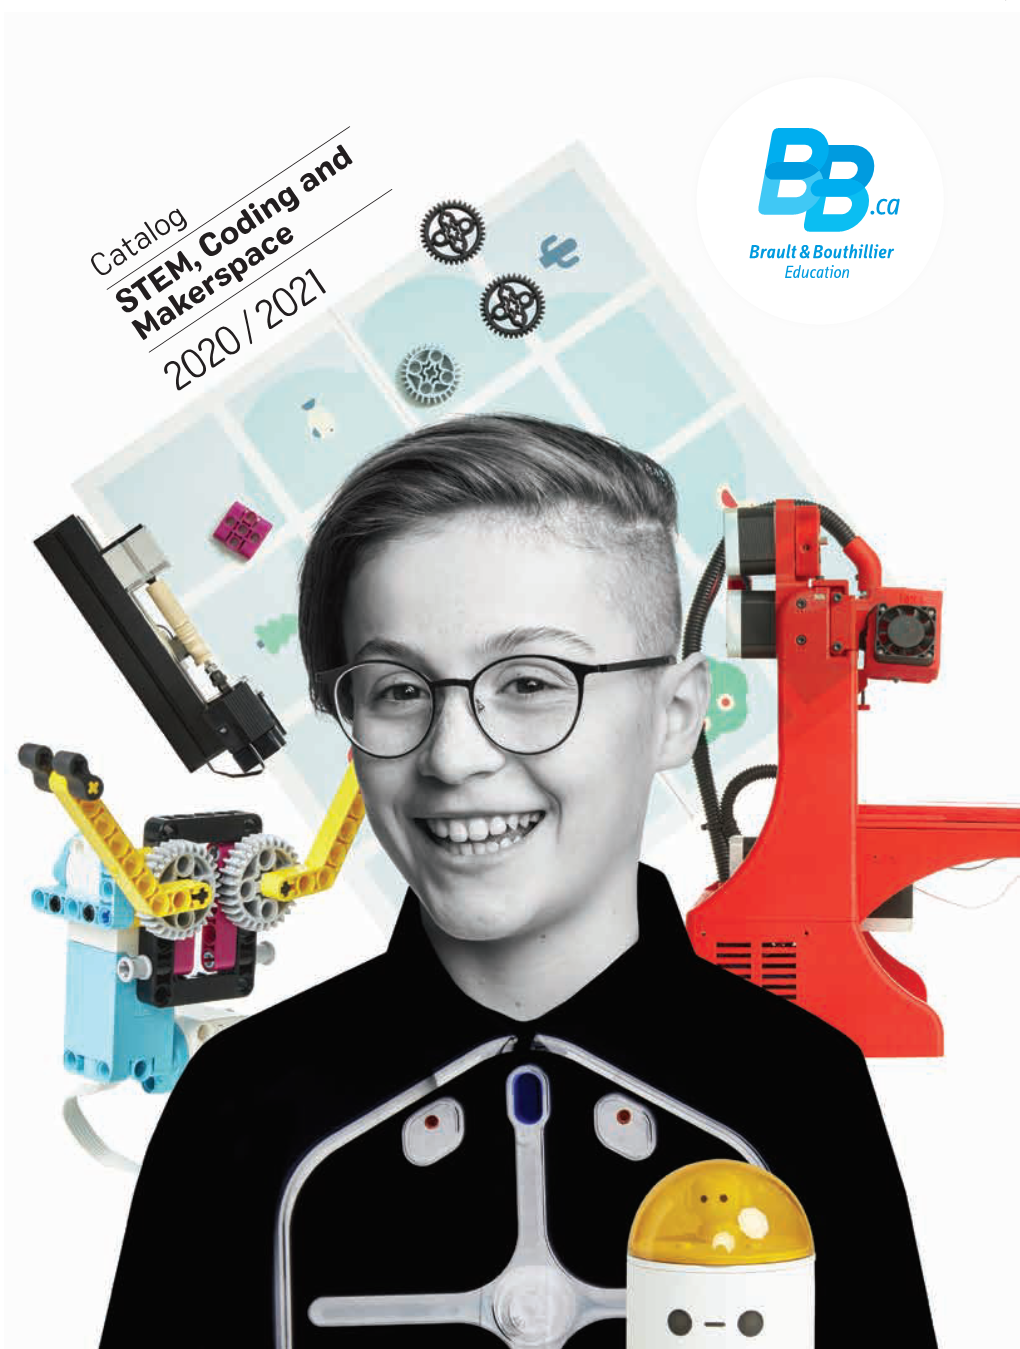 Catalog STEM, Coding and Makerspace/ 2021 2020